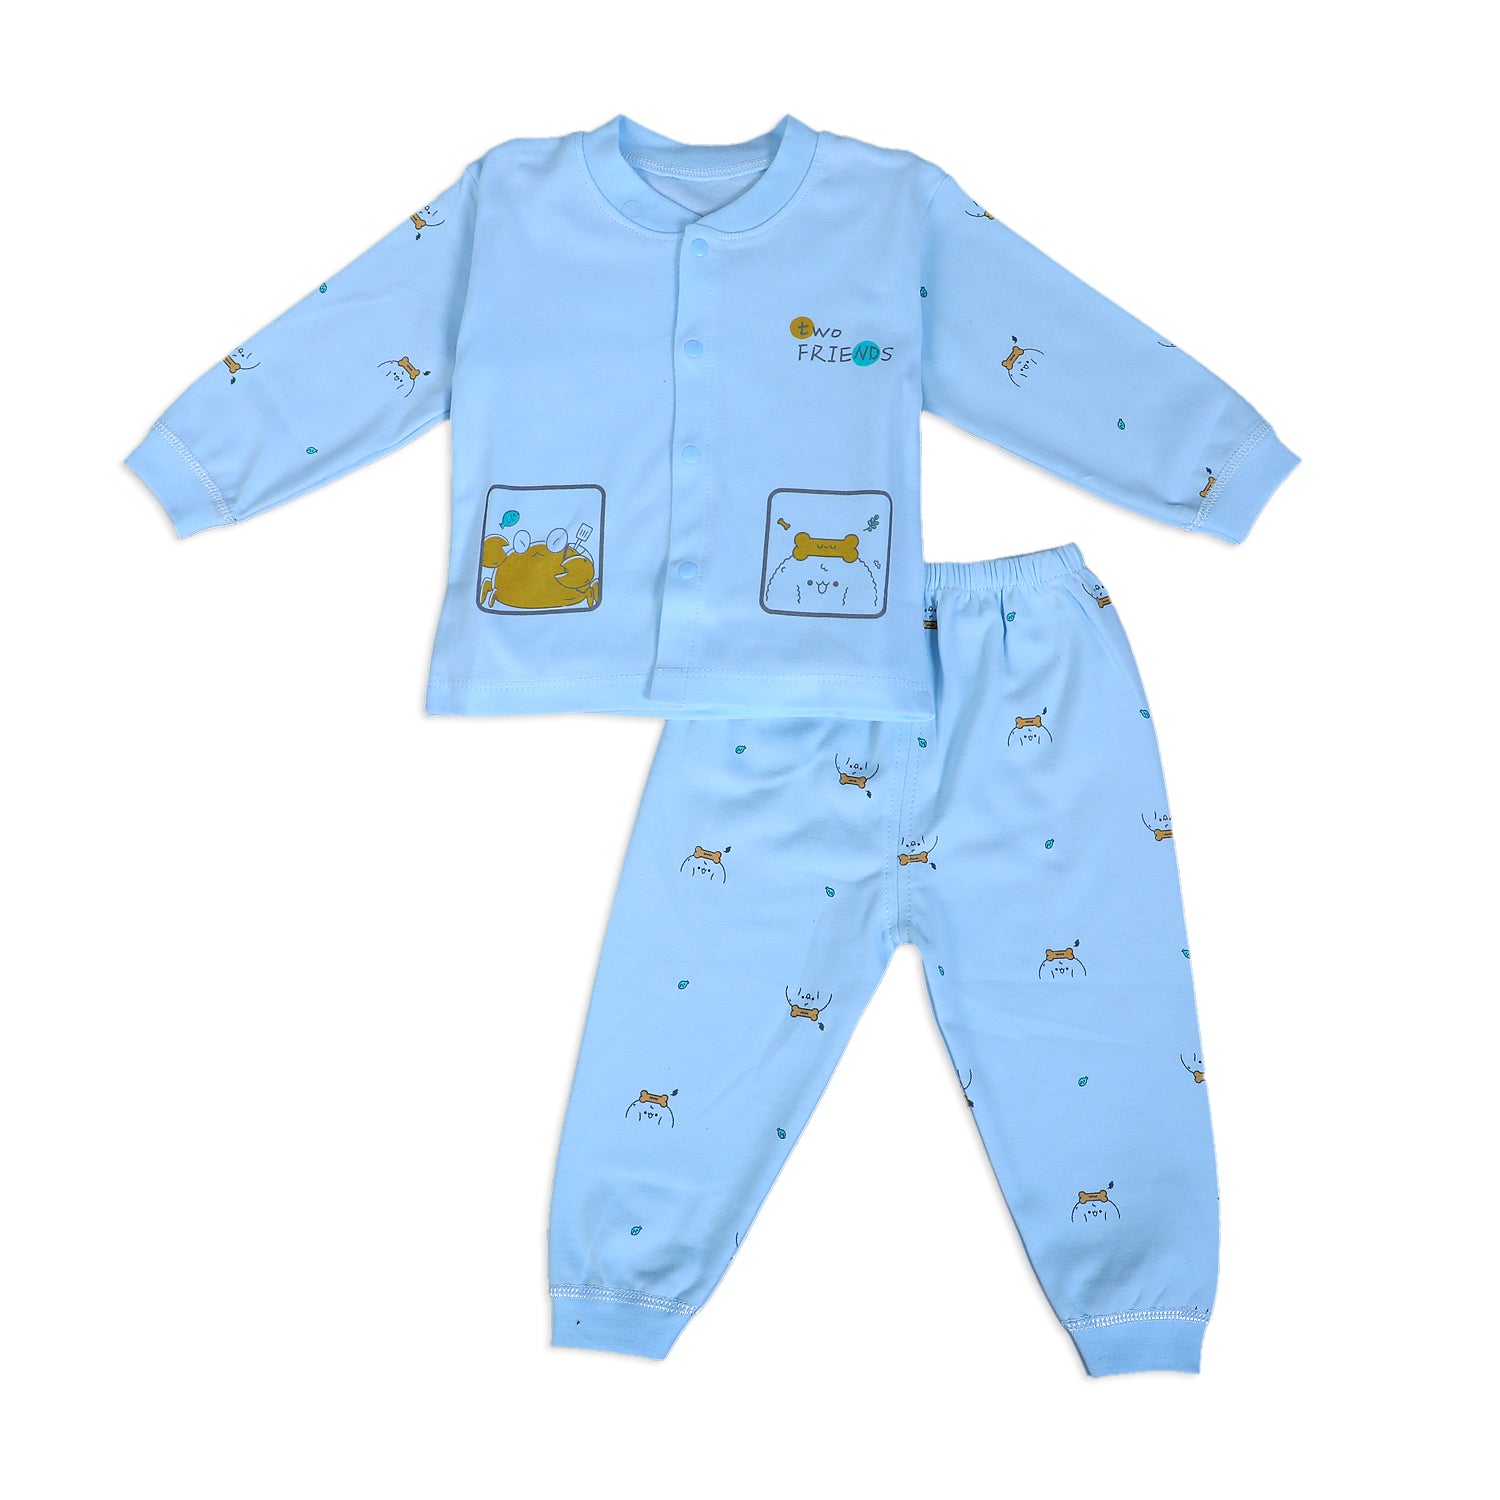 Two Friends Full Sleeves 2 Piece Buttoned Pyjama Set Night Suit - Blue